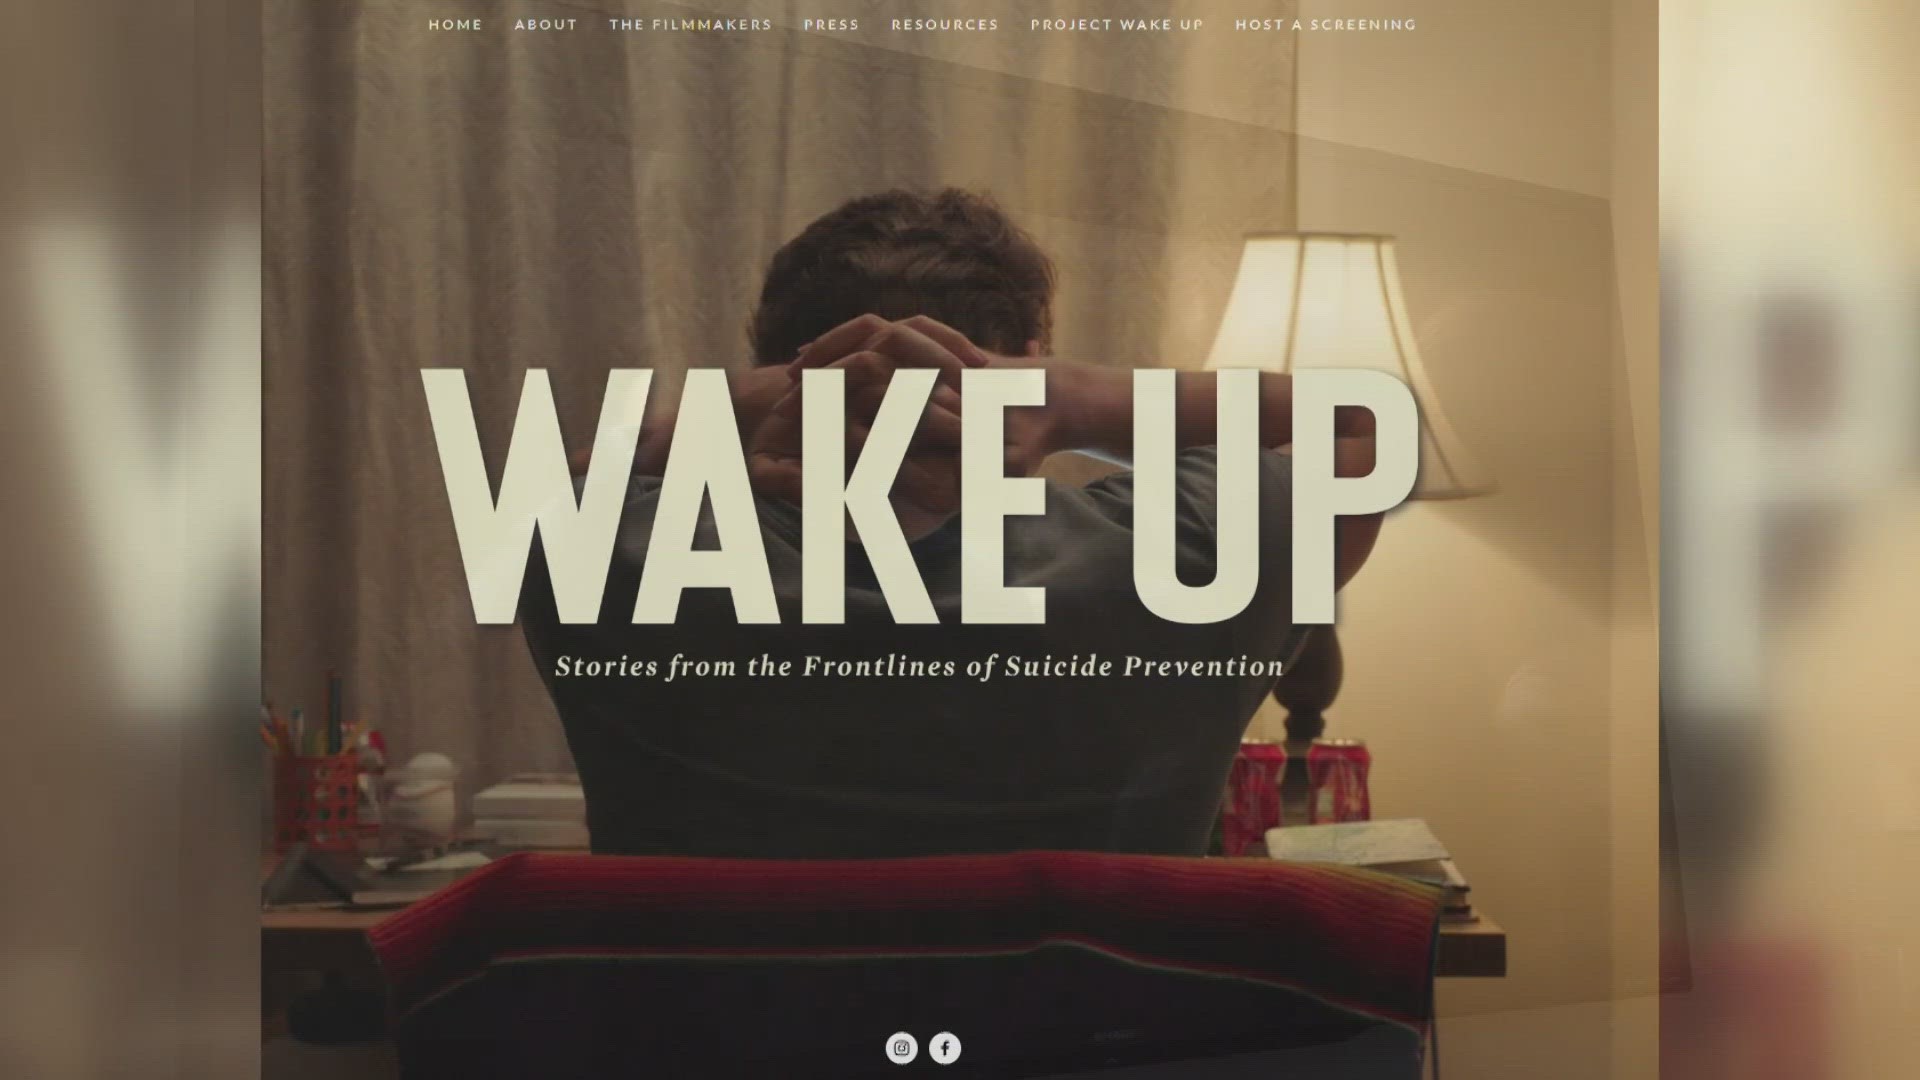 'Project Wake Up' was born in the fall of 2014 in Columbia. A friend's unexpected suicide inspired two St. Louis college students to turn grief into change.